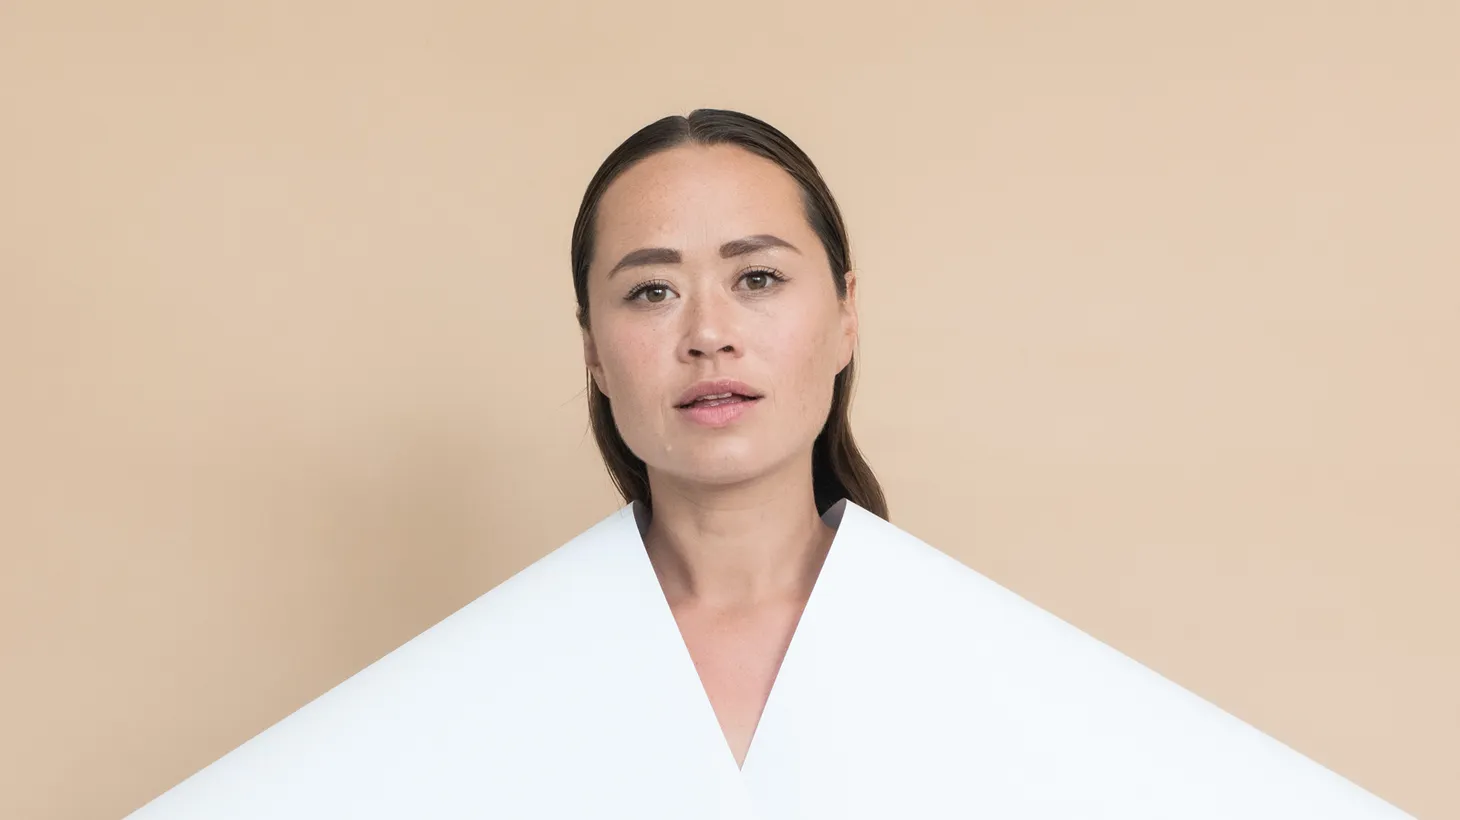 Danish-Japanese artist IDA KUDO draws inspiration from her ethnic roots to whirl electronic beats into theatrical drama ripe for the stage. “Okina Nami” means “big wave” in Japanese and is culled from her new EP, Proud.